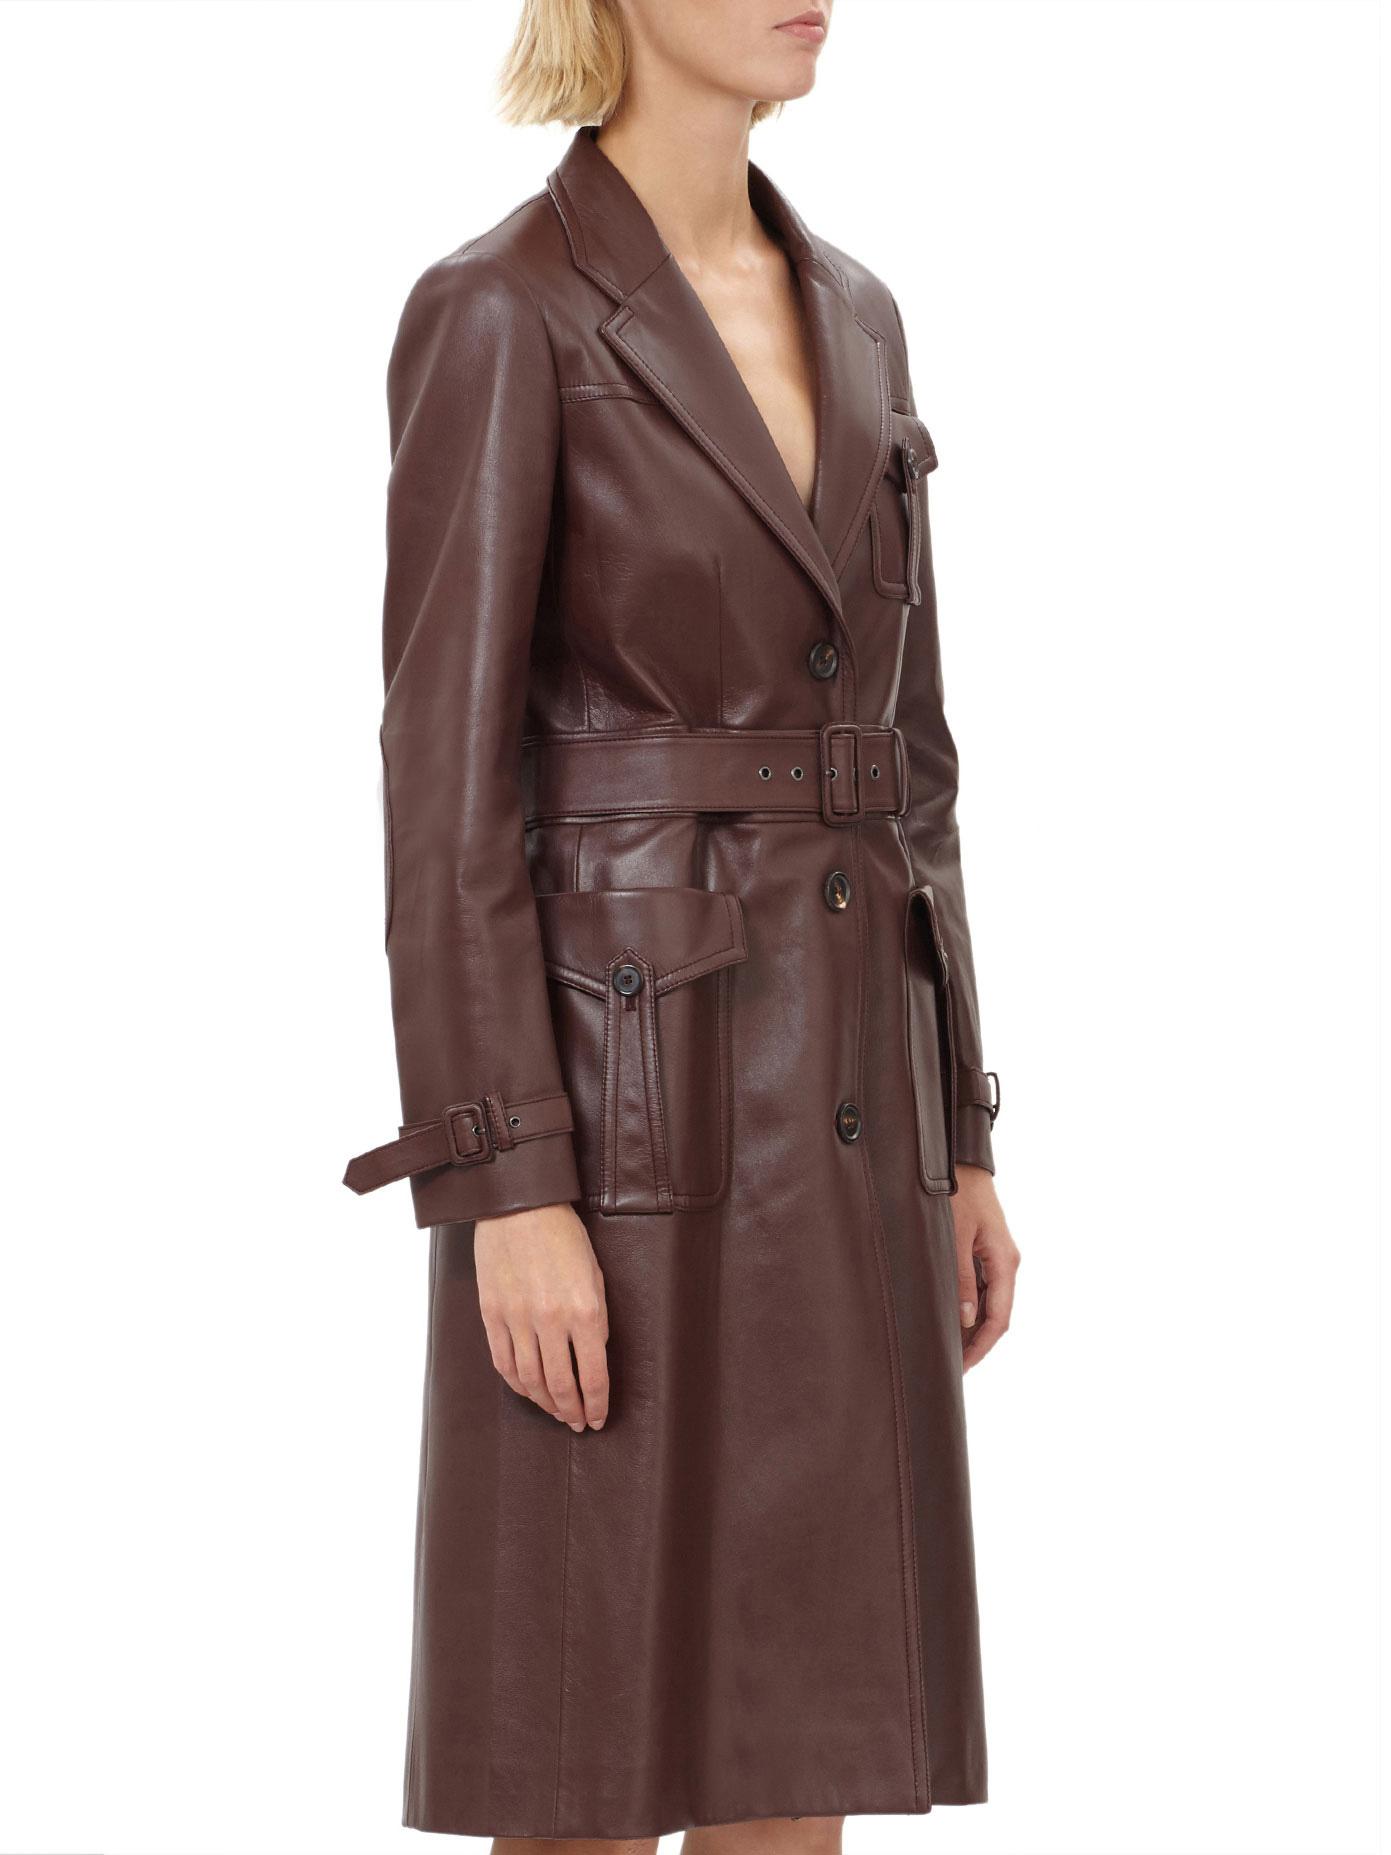 Prada Leather Trench Coat in Brown | Lyst